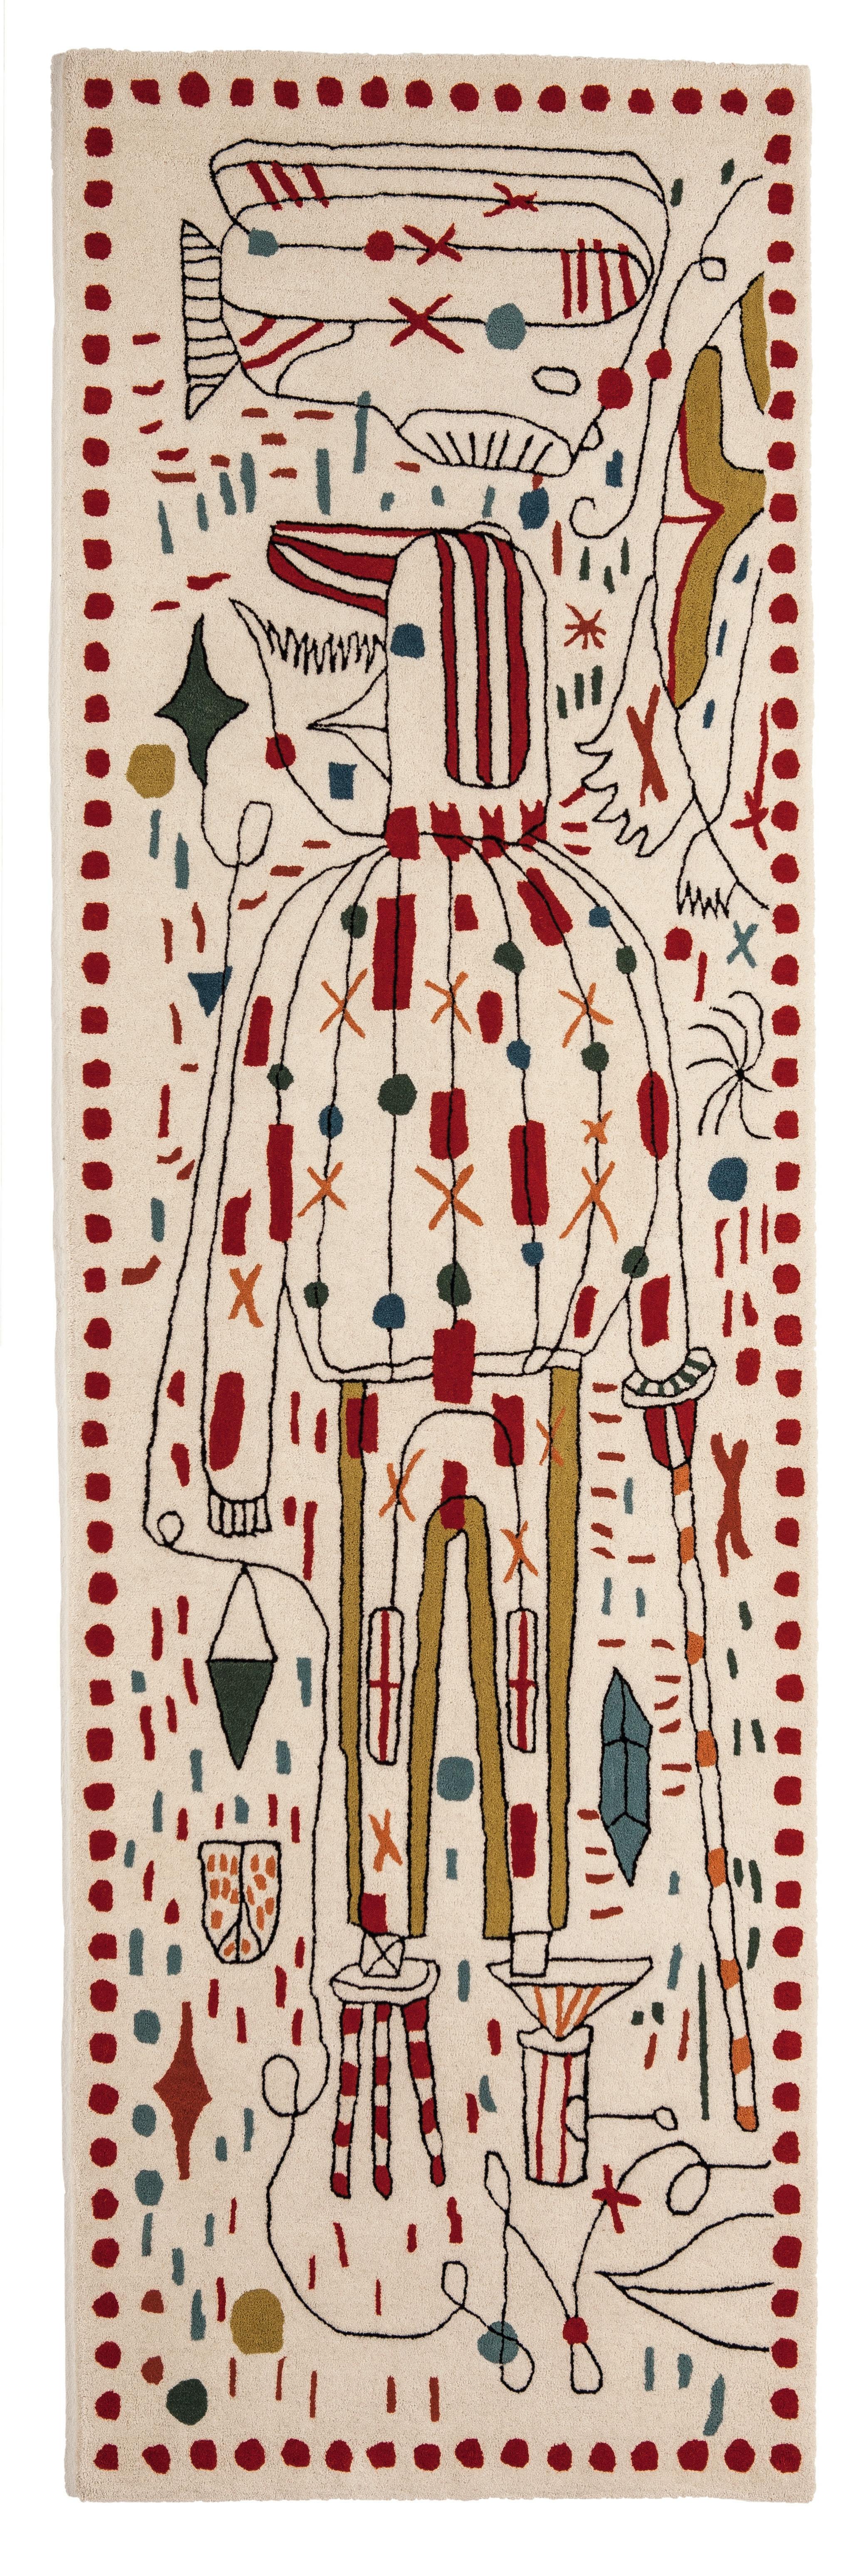 'Hayon x Nani' Hand-Tufted Rug or Tapestry by Jaime Hayon for Nanimarquina For Sale 3